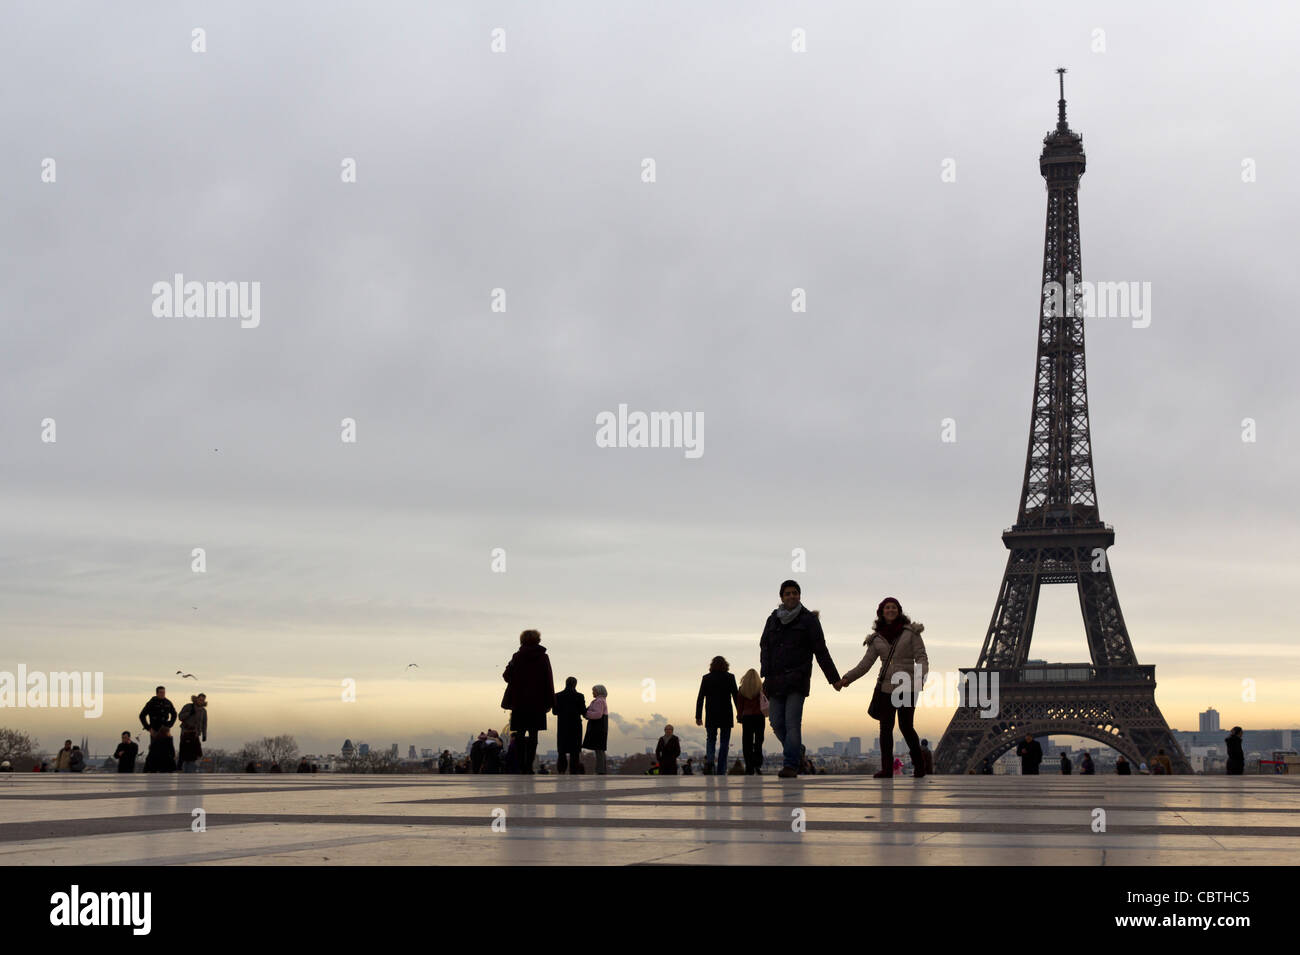 Place du Trocadéro with Eiffel Tower in background, Paris, France Stock Photo